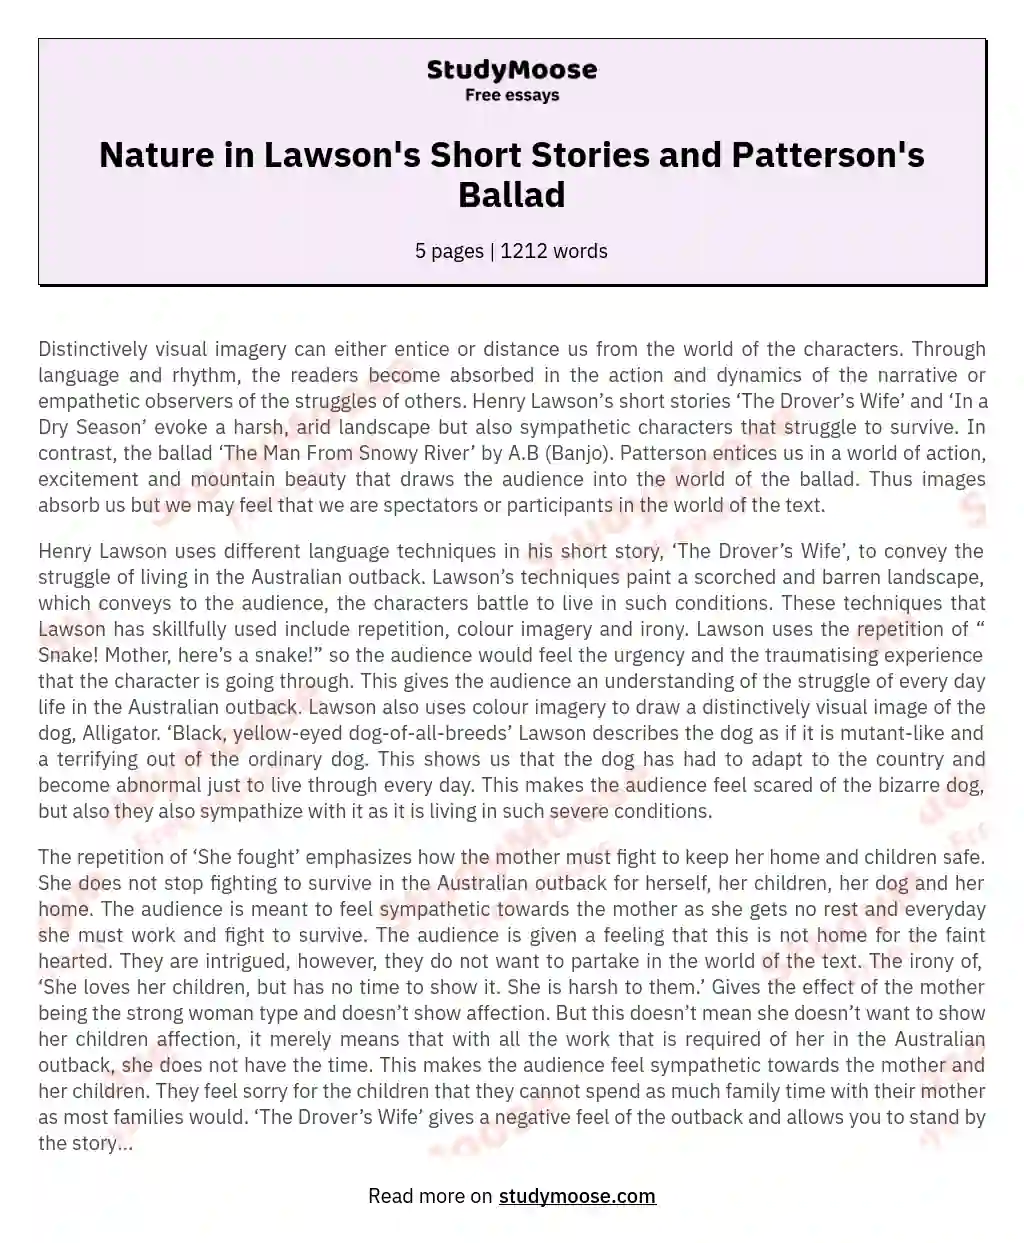 Nature in Lawson's Short Stories and Patterson's Ballad essay